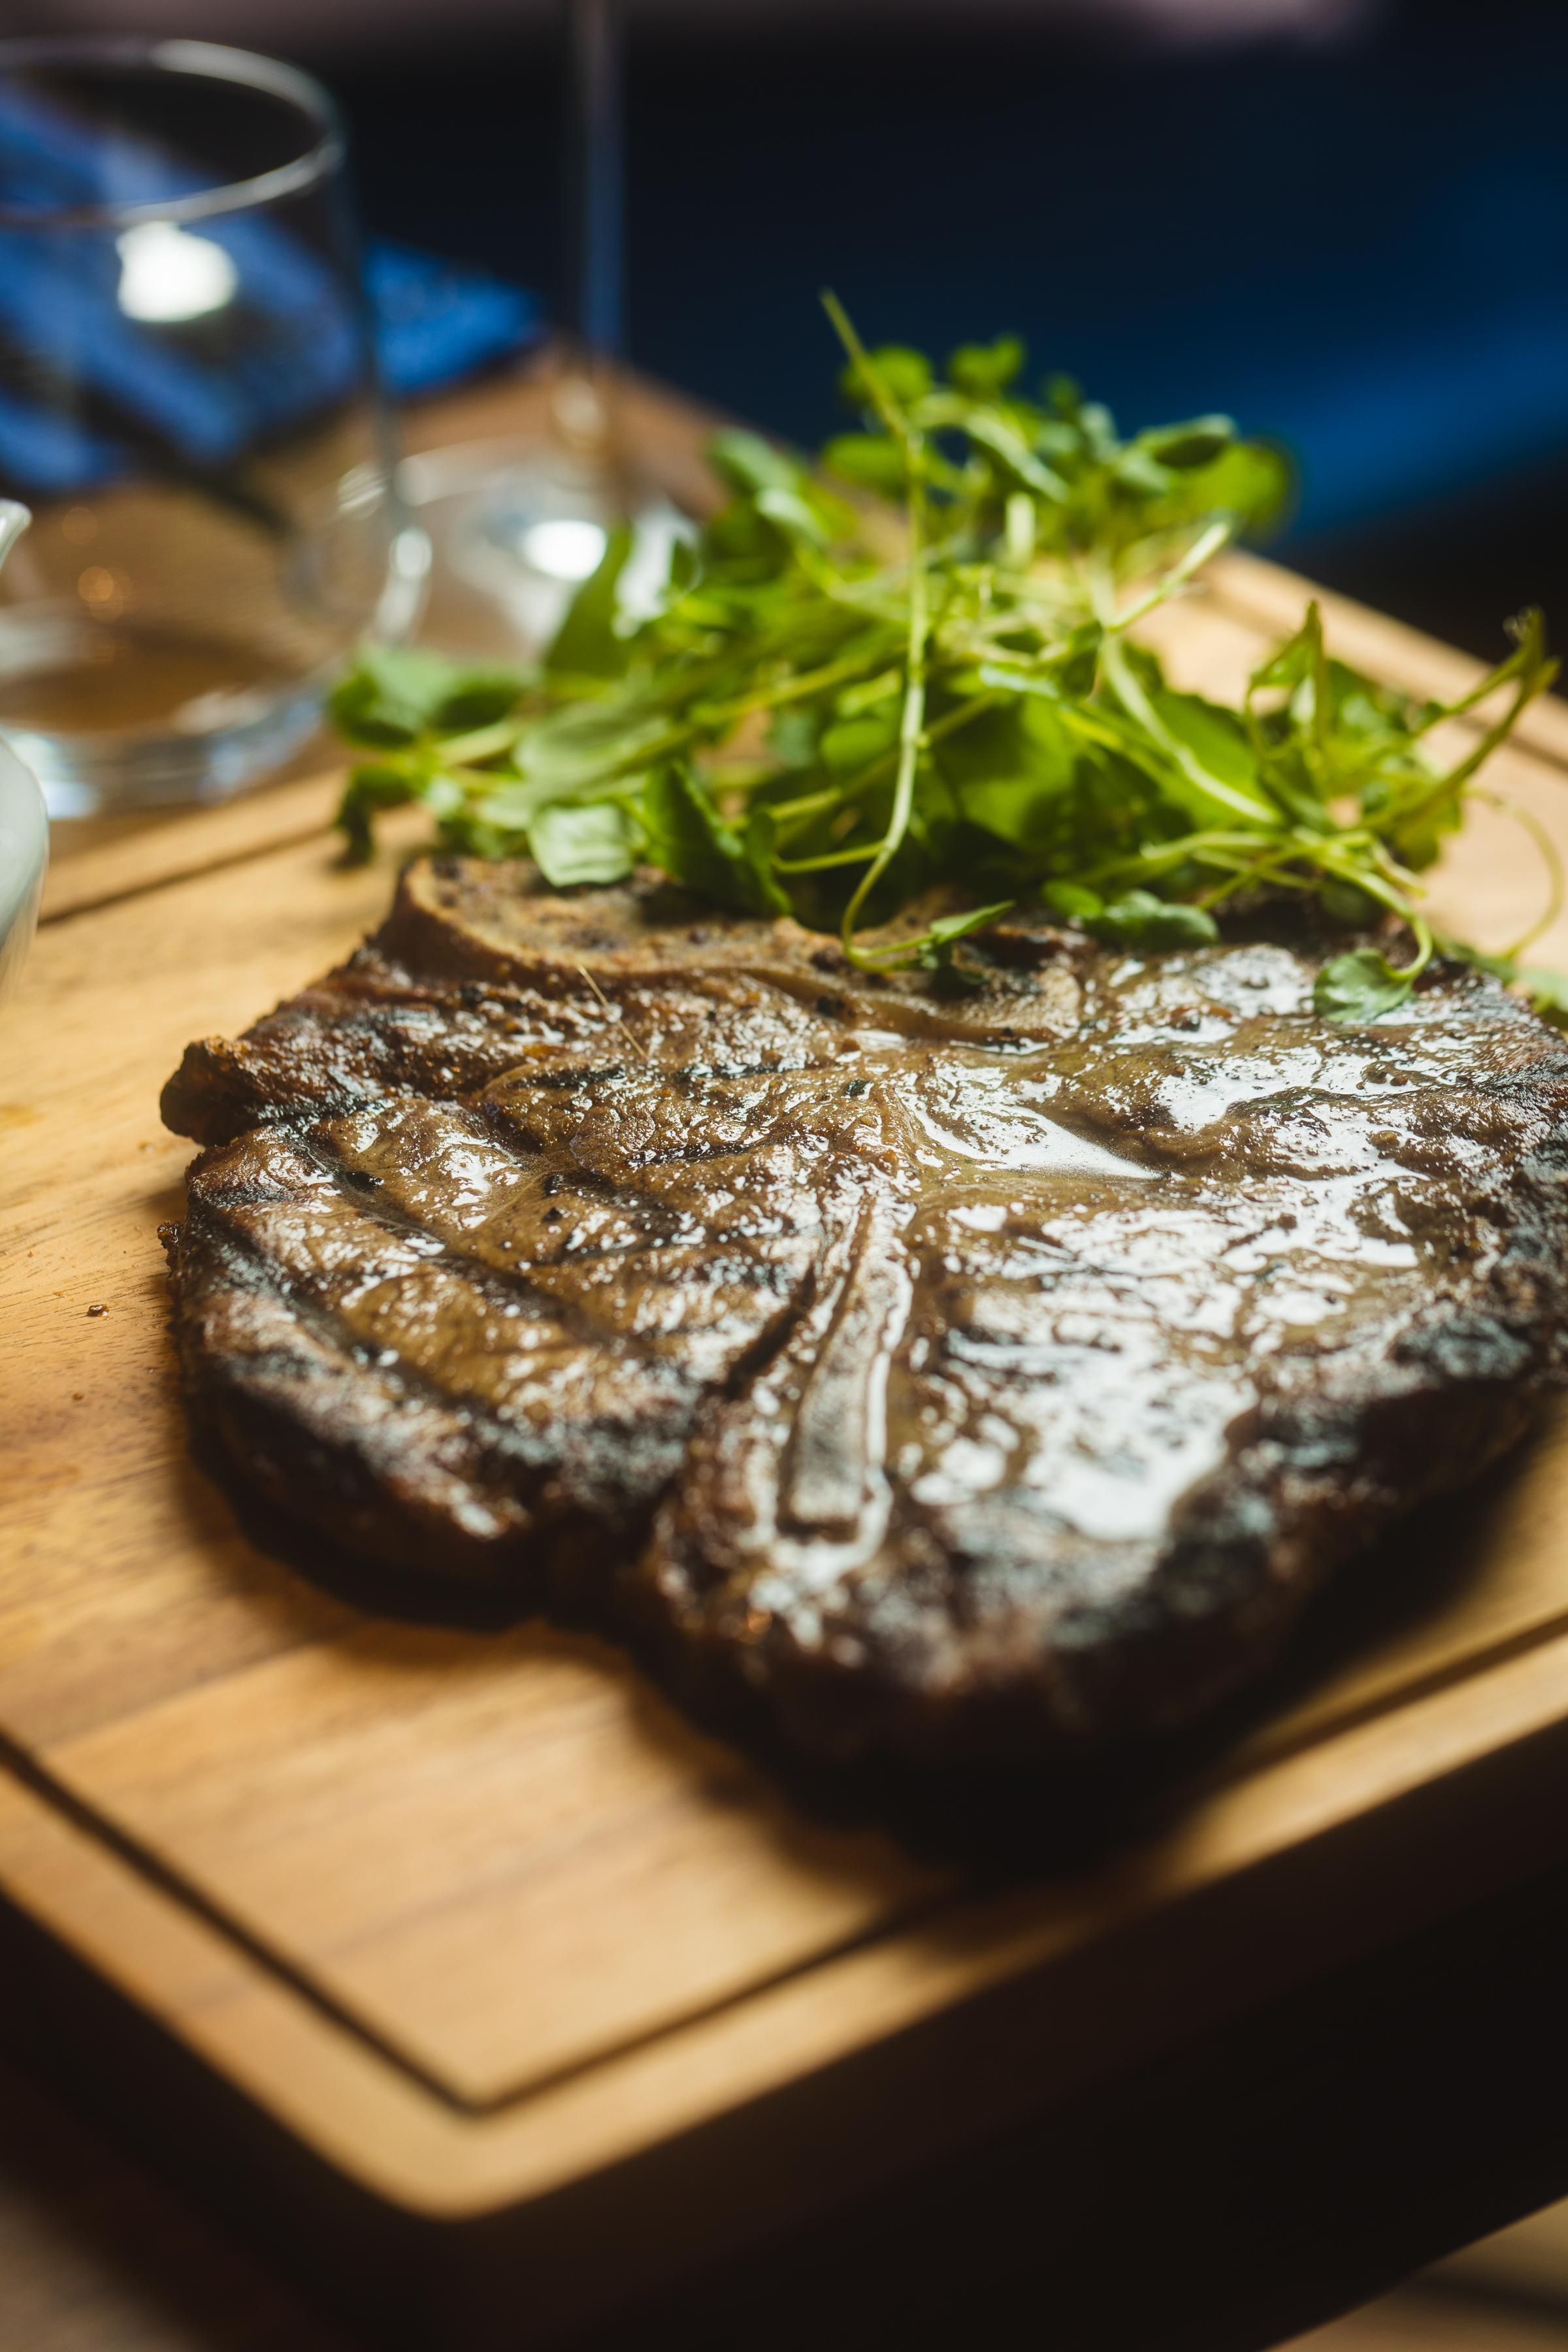 16oz T-bone -the daddy of all steaks, sirloin and fillet separated by the T-bone